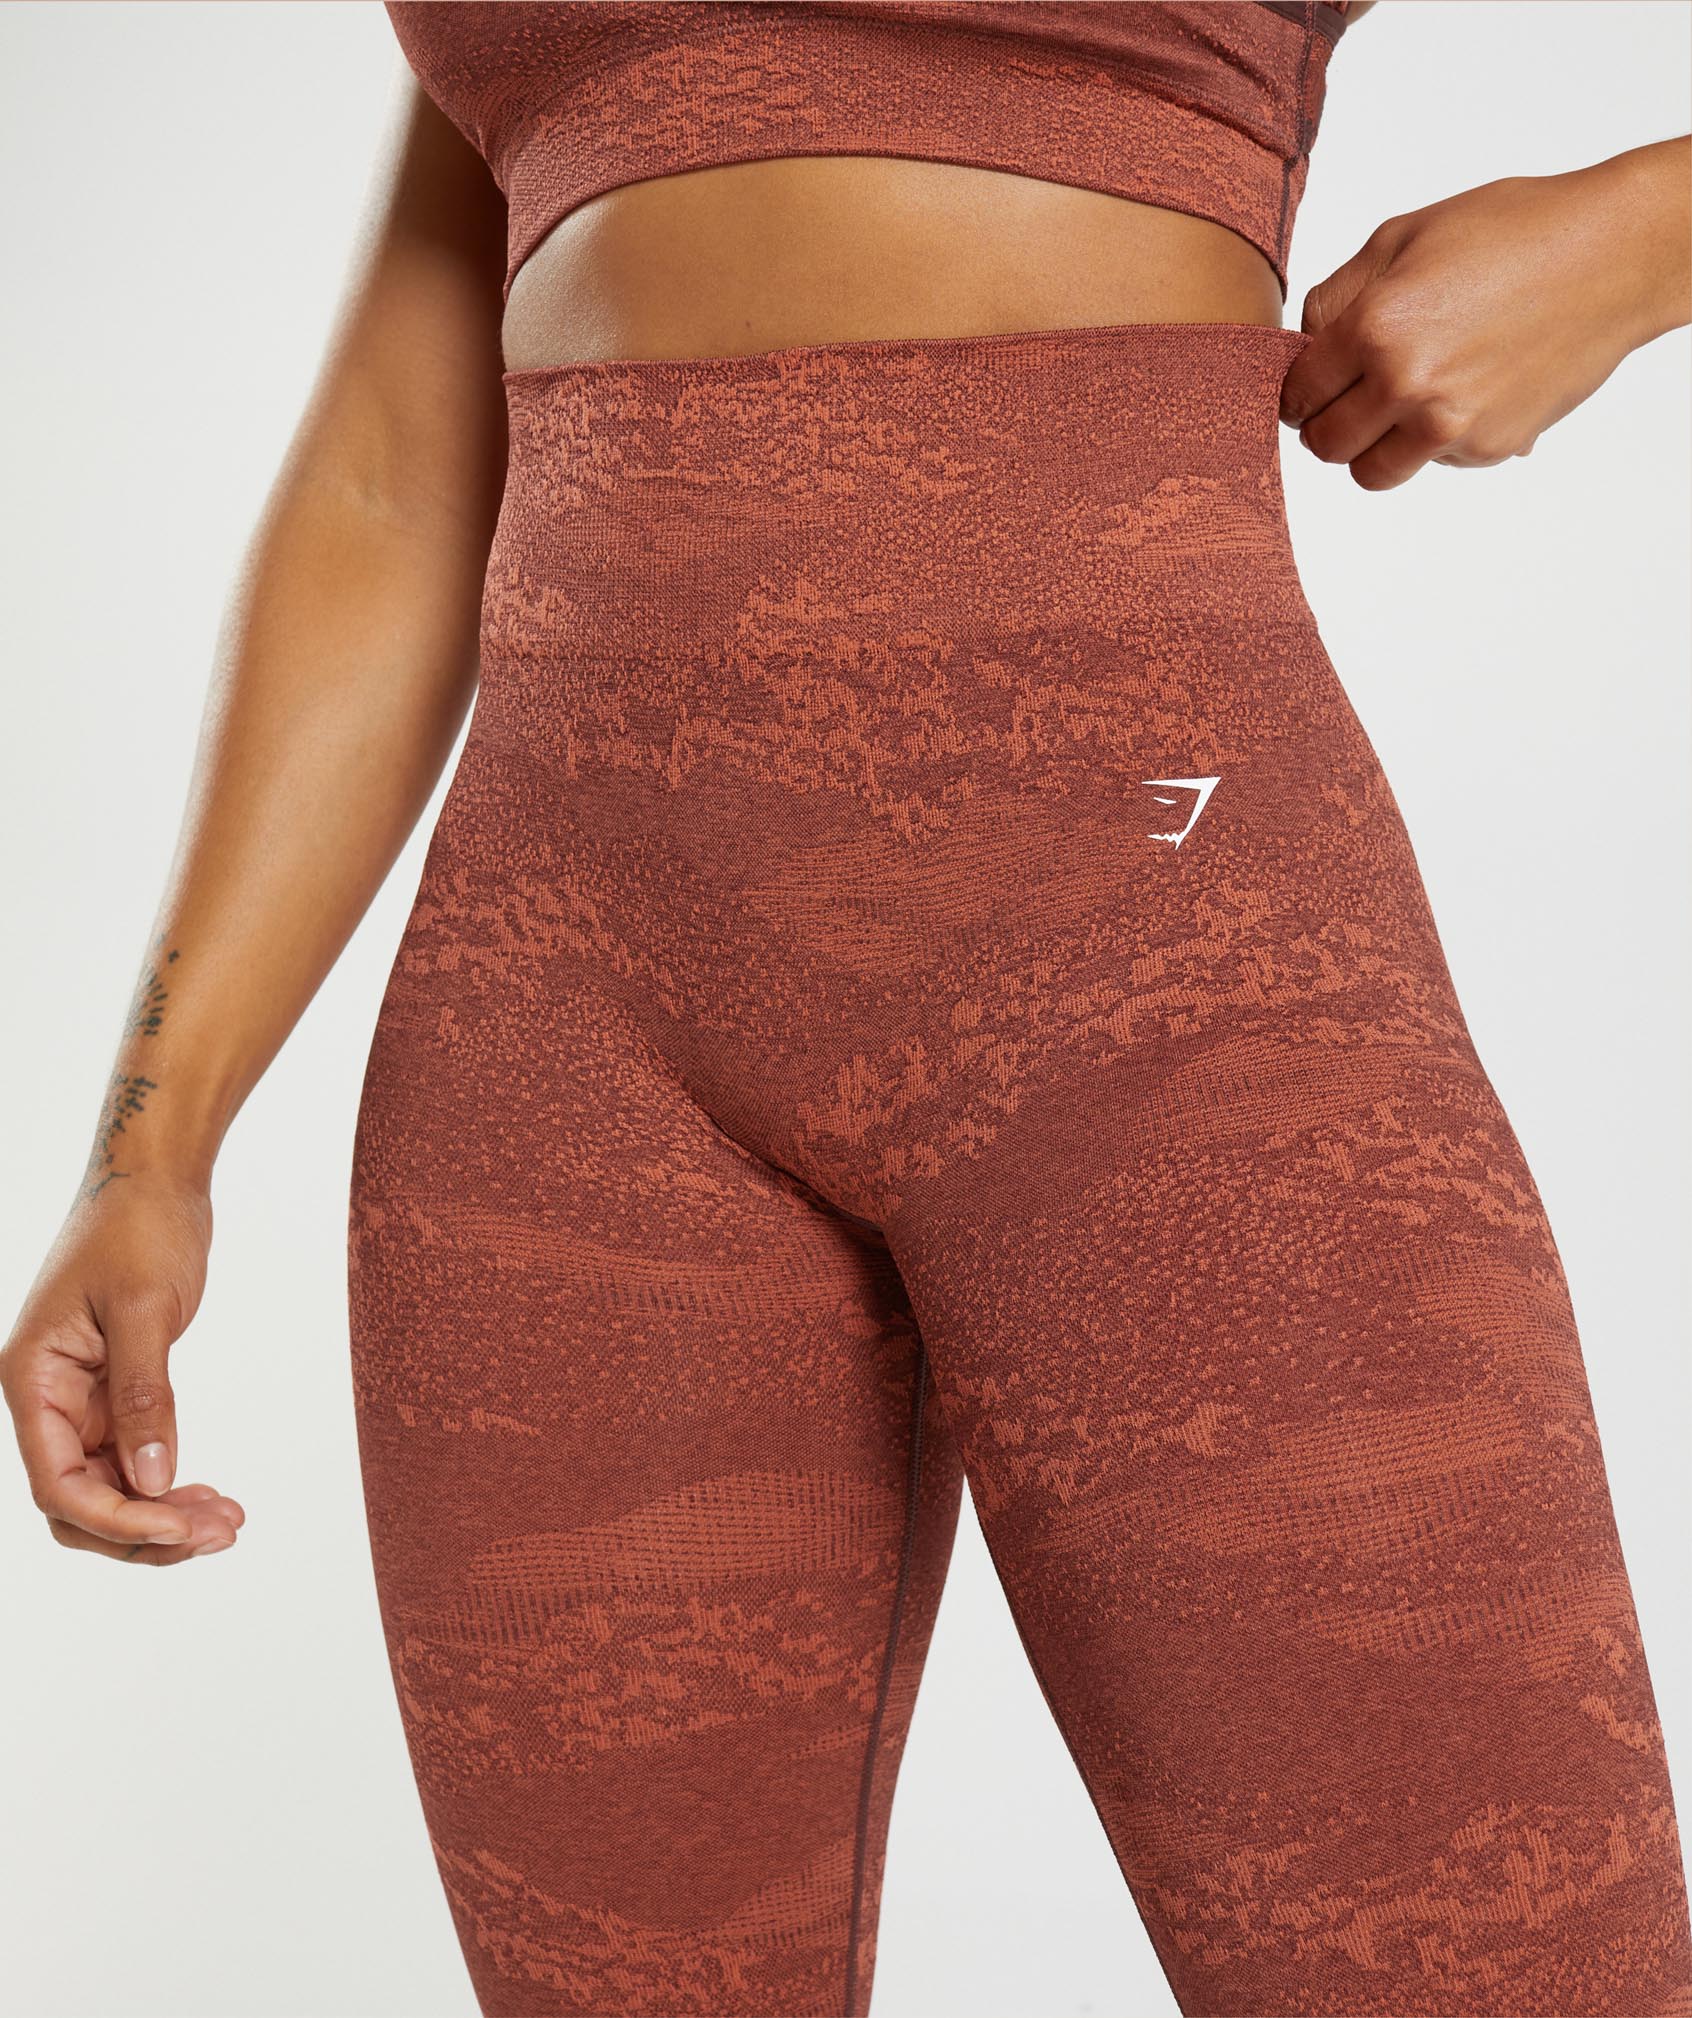 Adapt Camo Seamless Leggings in Storm Red/Cherry Brown - view 5